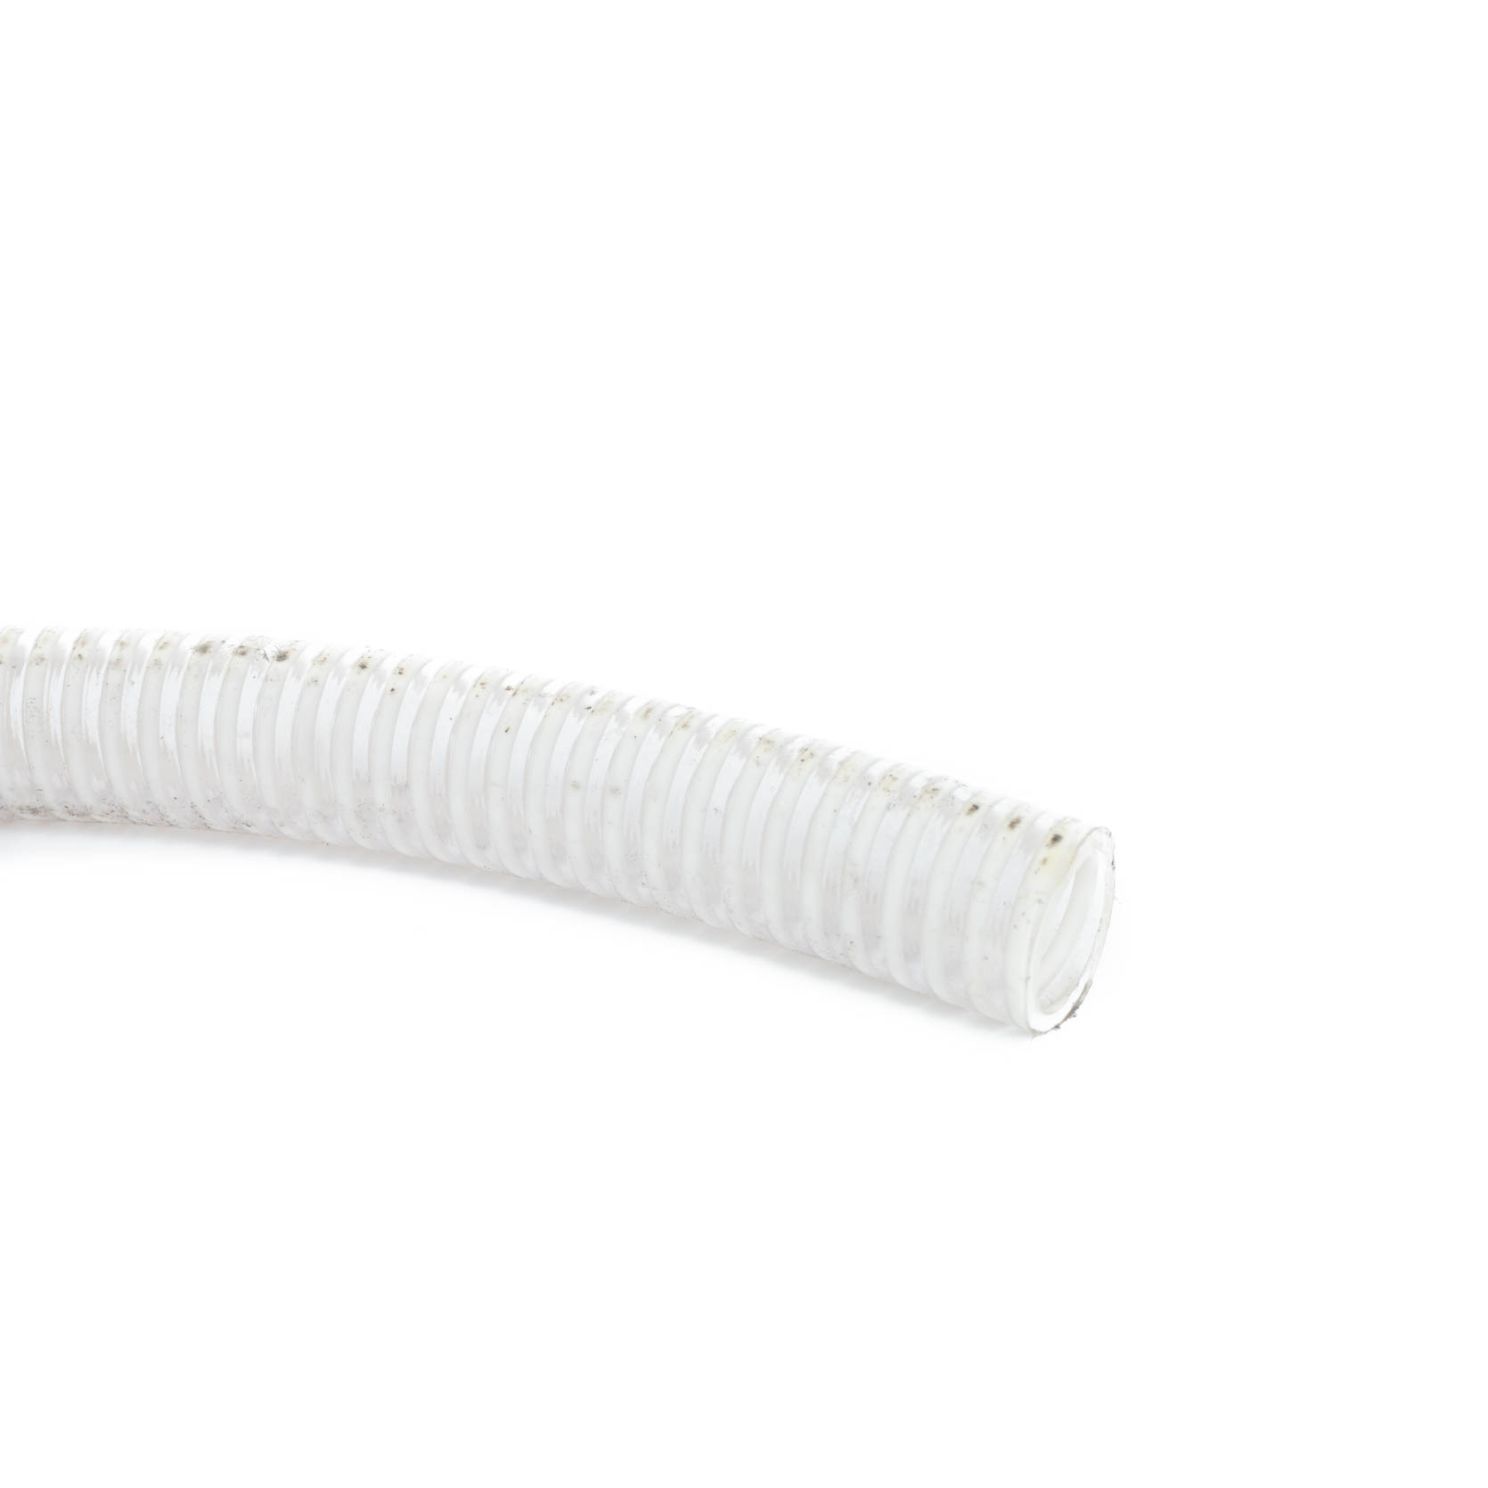 Apache 1'' PVC Clear Water Suction Hose